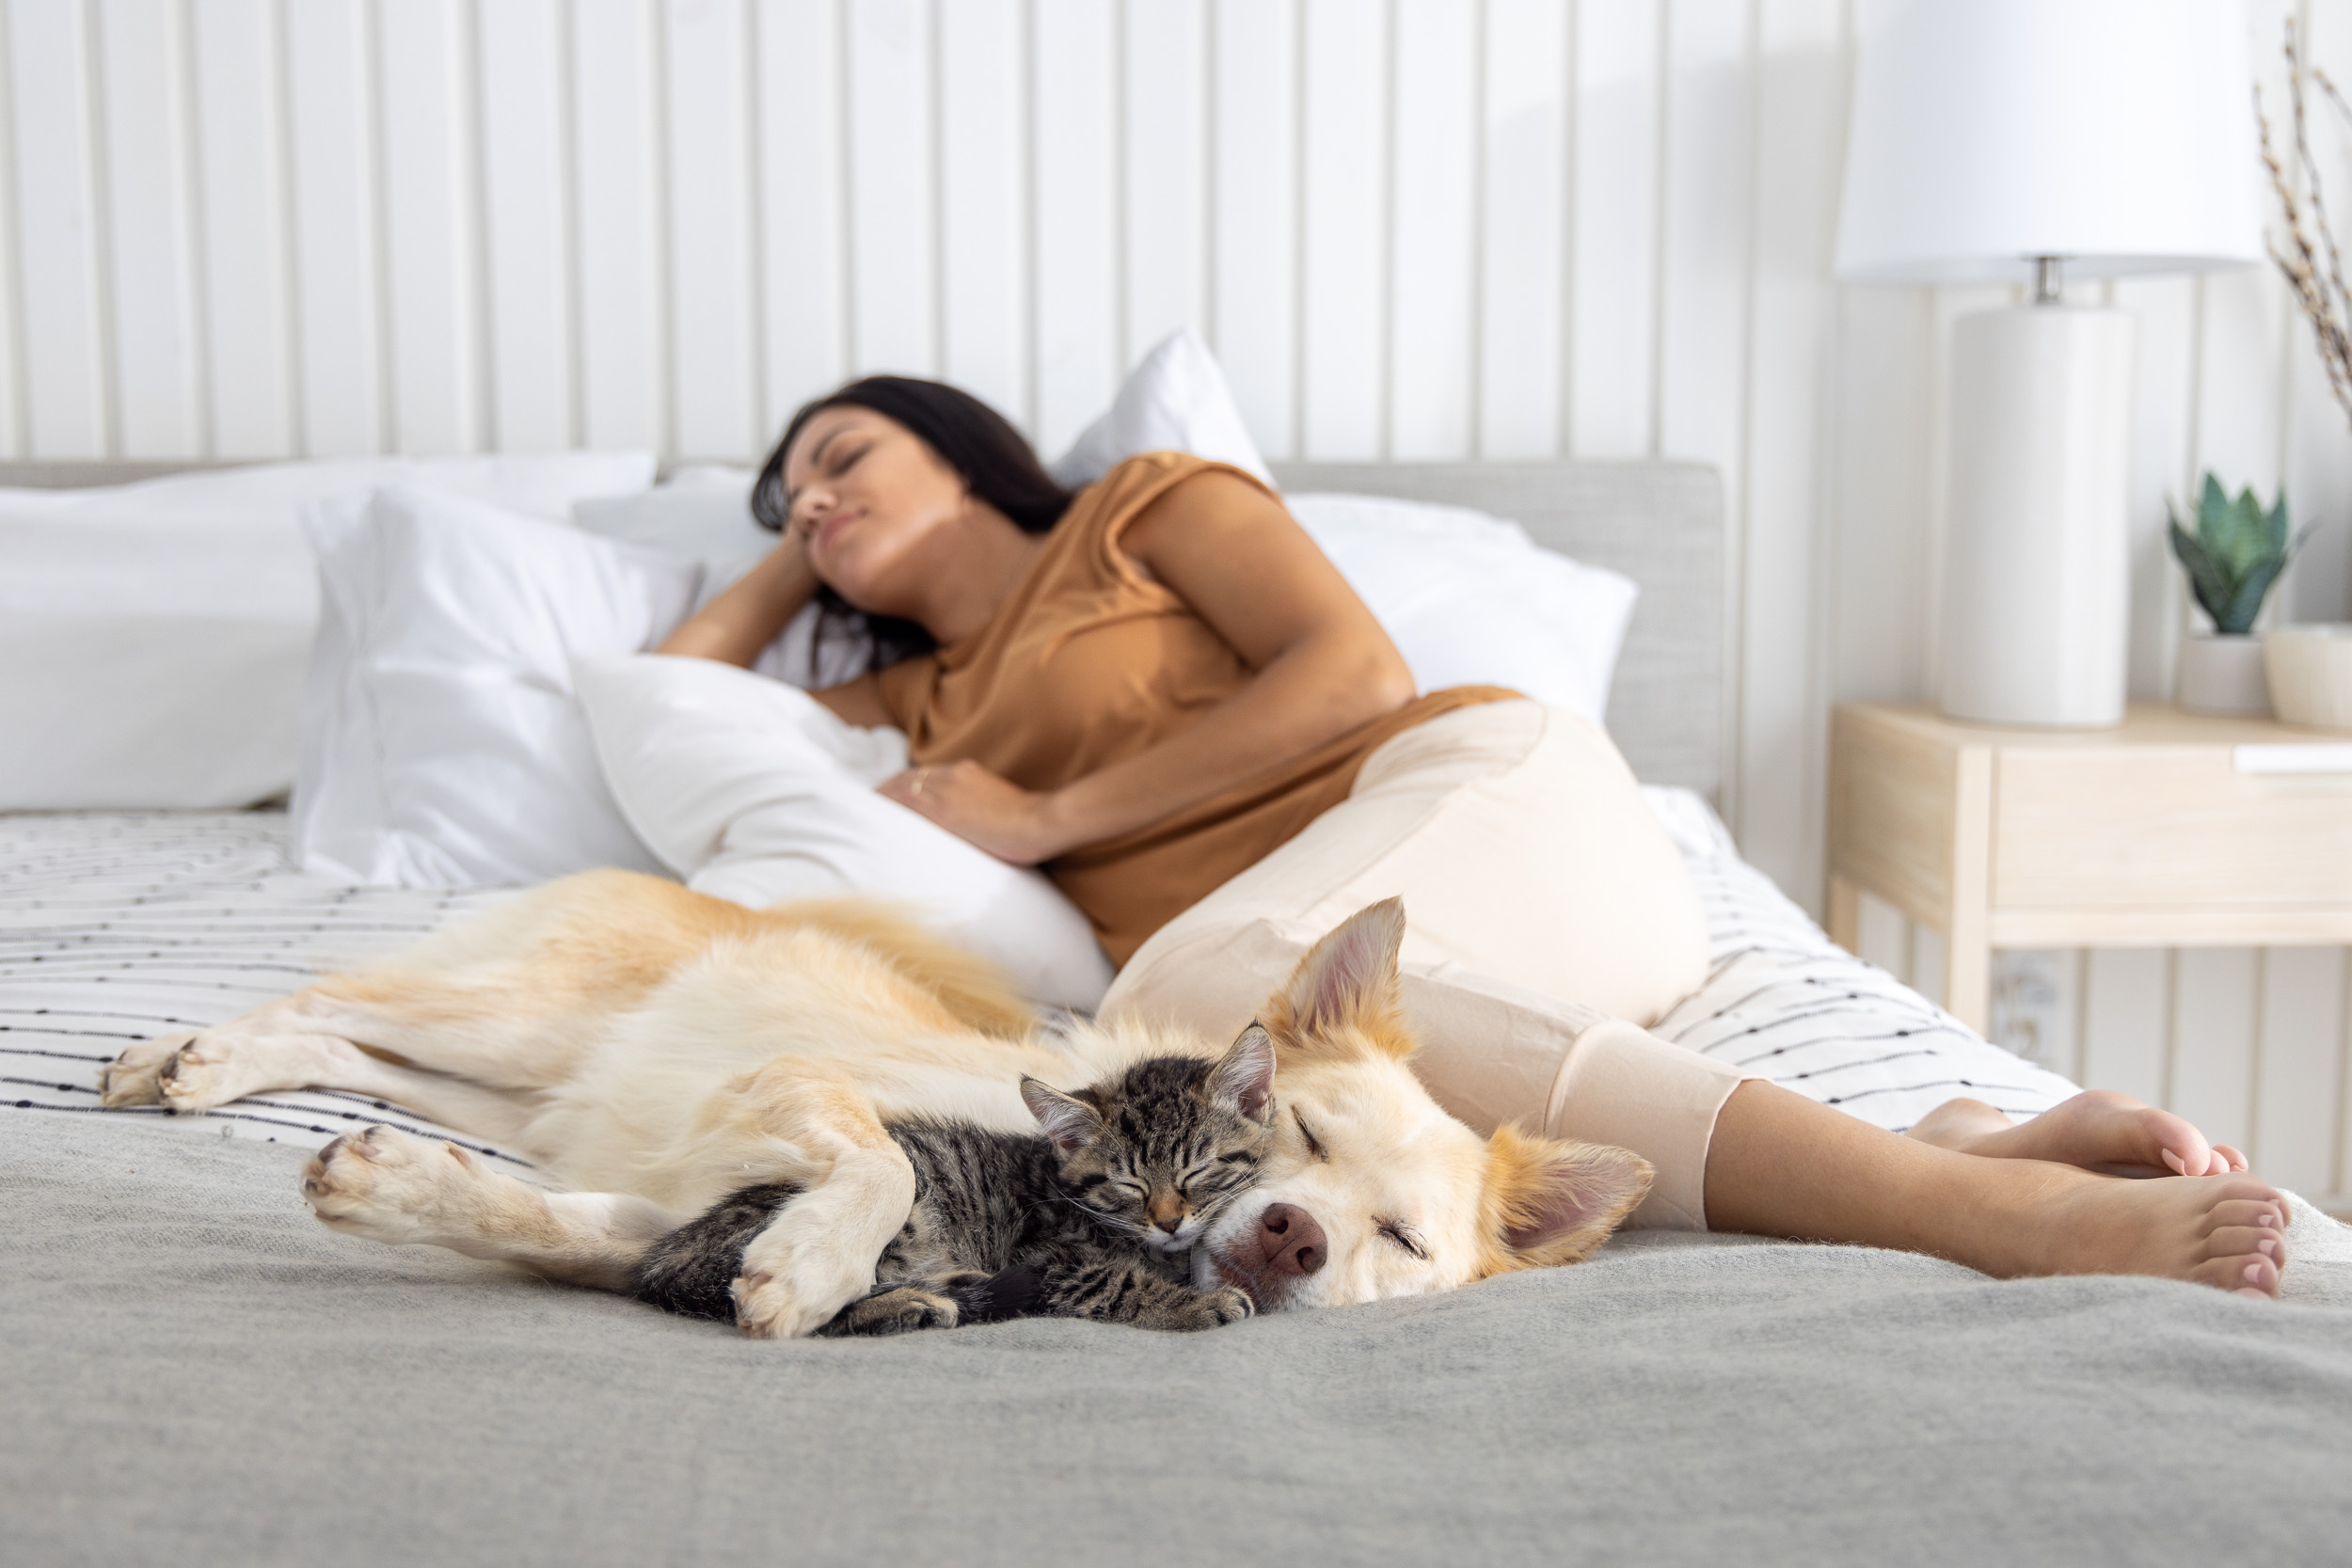 Pet and People Photography | Woman Sleeping with Kitten and Dog by Mark Rogers